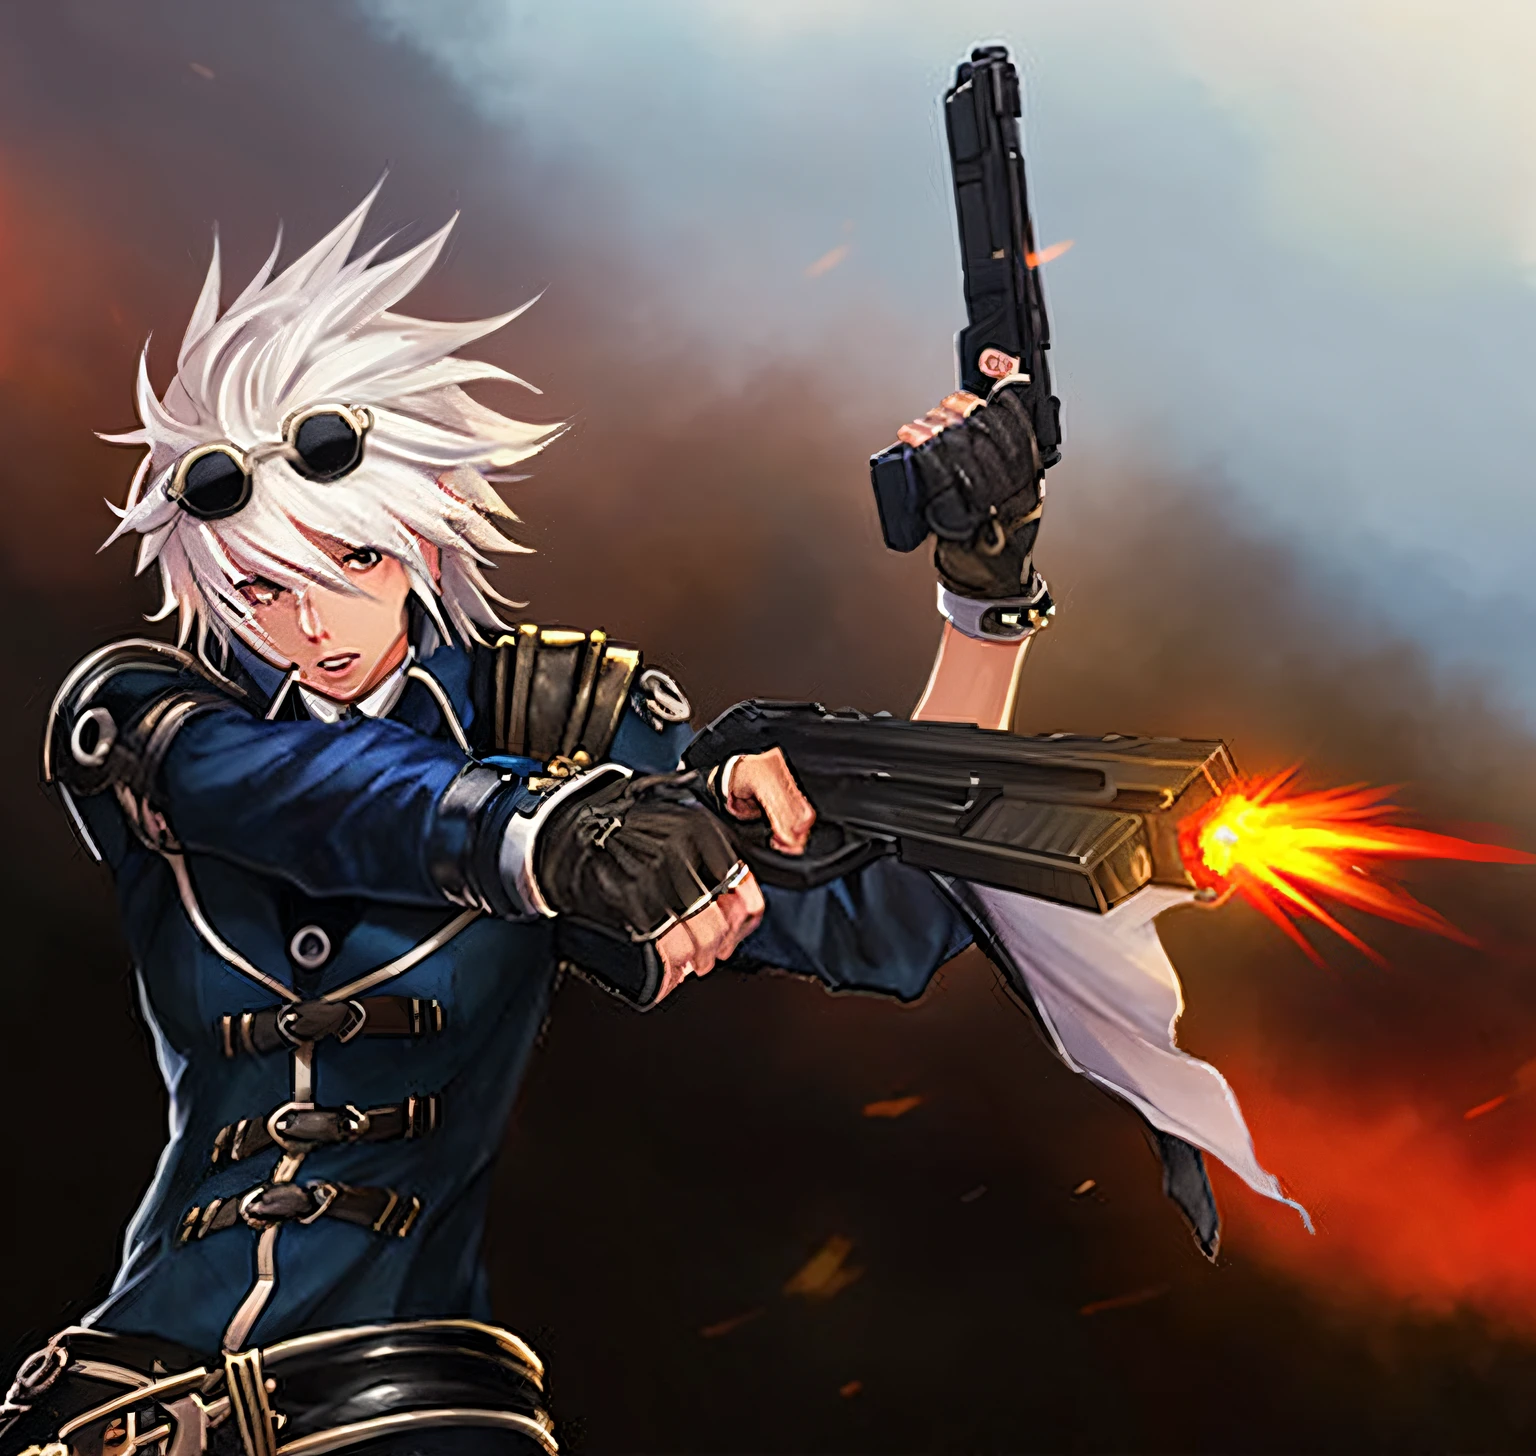 Anime character with gun and goggles holding a fireball, thancred waters in style of wlop, trigger anime artstyle, hero 2 d fanart artsation, 2D game fanart, anime machine gun fire, thancred waters, Epic anime style, eye-catching detailed art style, Detailed game art, 2 d digital video game art, character art the contra, detailed game art illustration